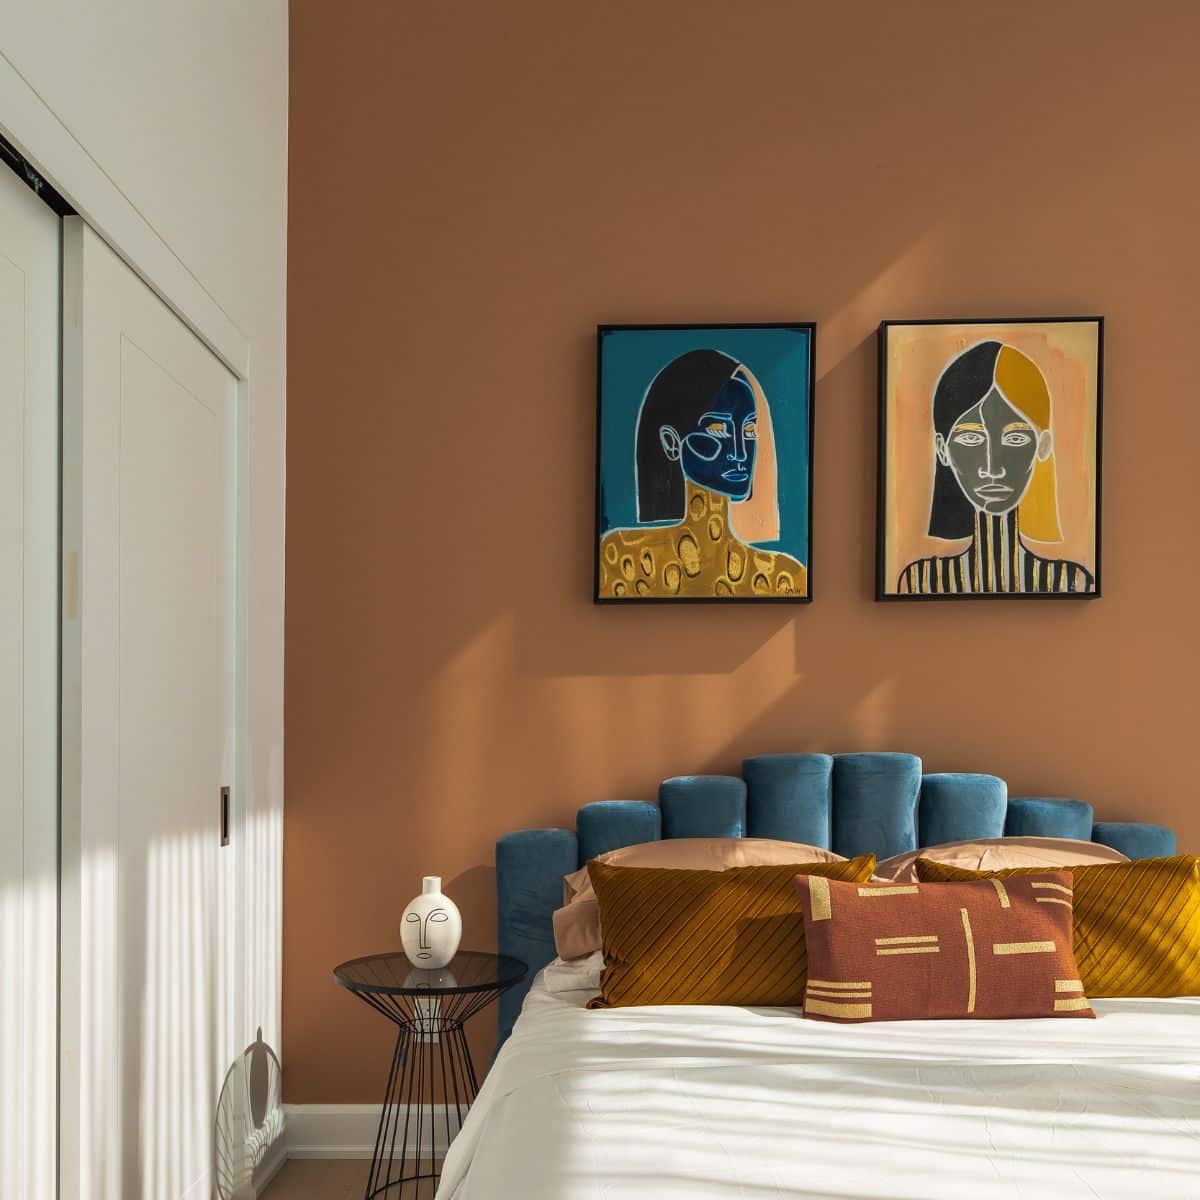 A teal and orange bedroom with paintings on the wall